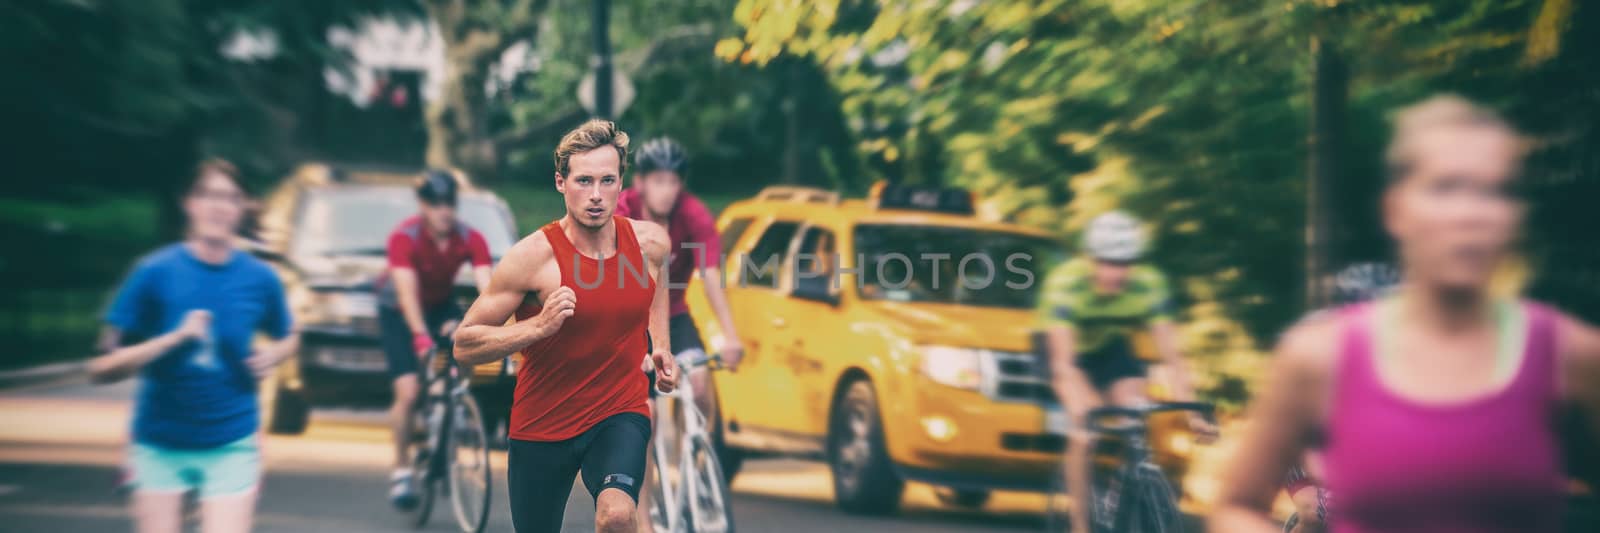 Fit runners motion blur people crowd training in city panorama banner - Athletes jogging, biking in New York city with yellow cabs cars background. Man running fast in blurred motion by Maridav